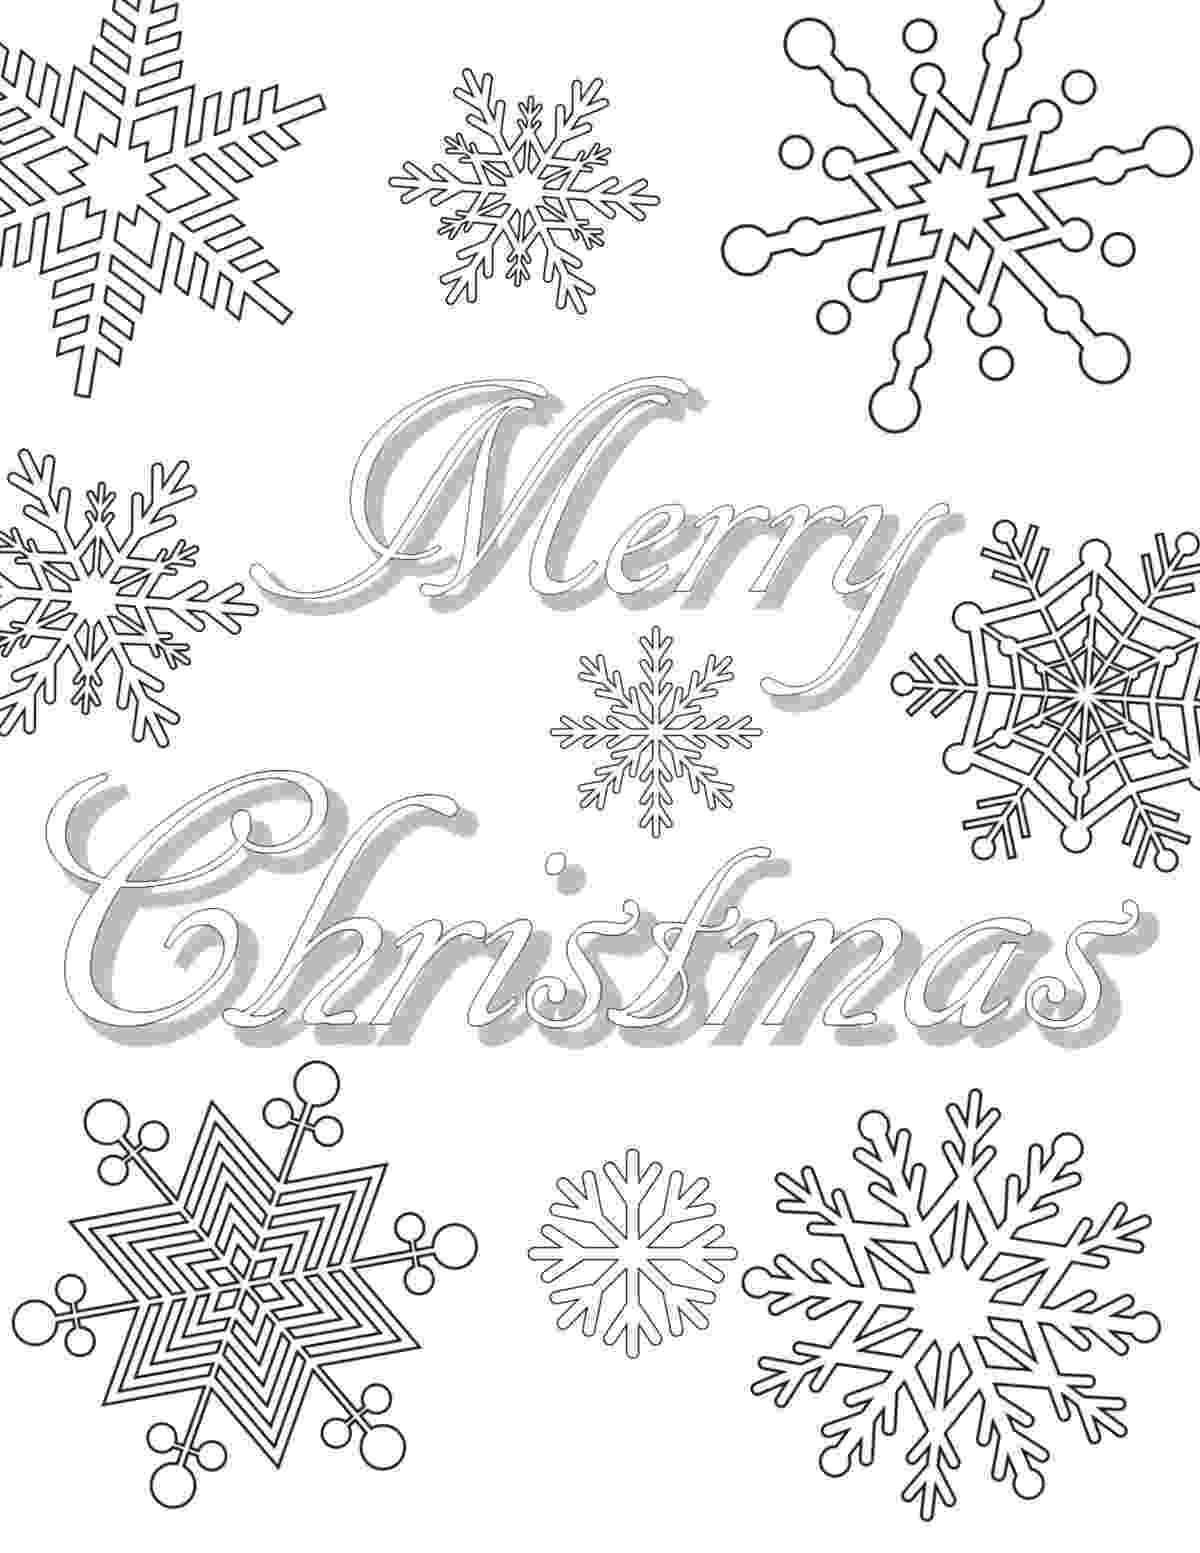 xmas colouring pages for adults christmas coloring page for adults poinsettia coloring page xmas pages adults for colouring 